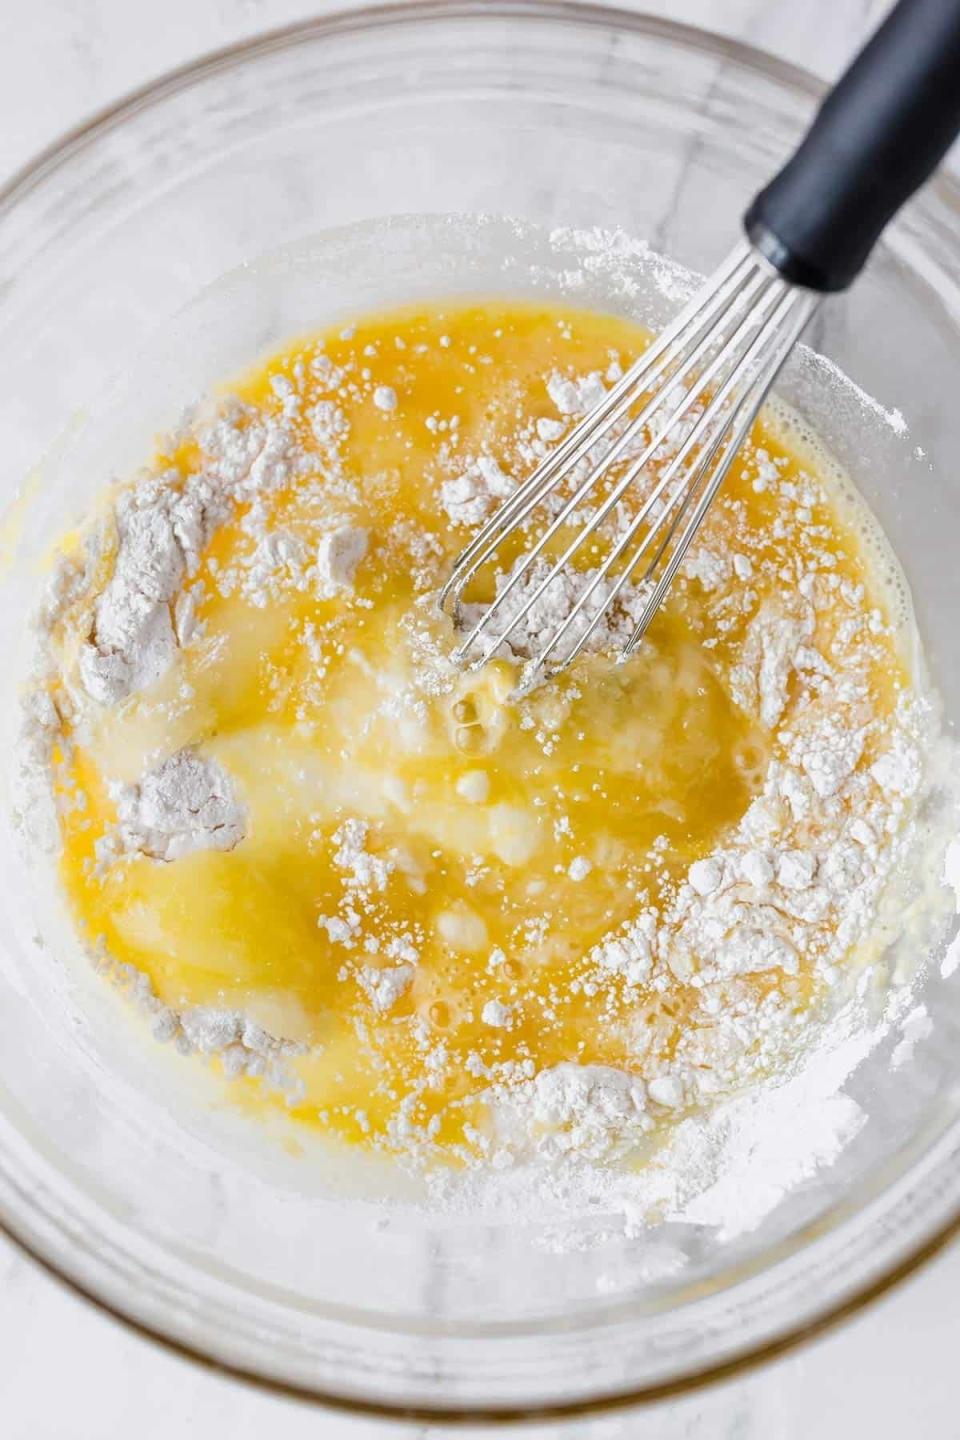 Mixing bowl with whisk and ingredients partially combined, likely for baking